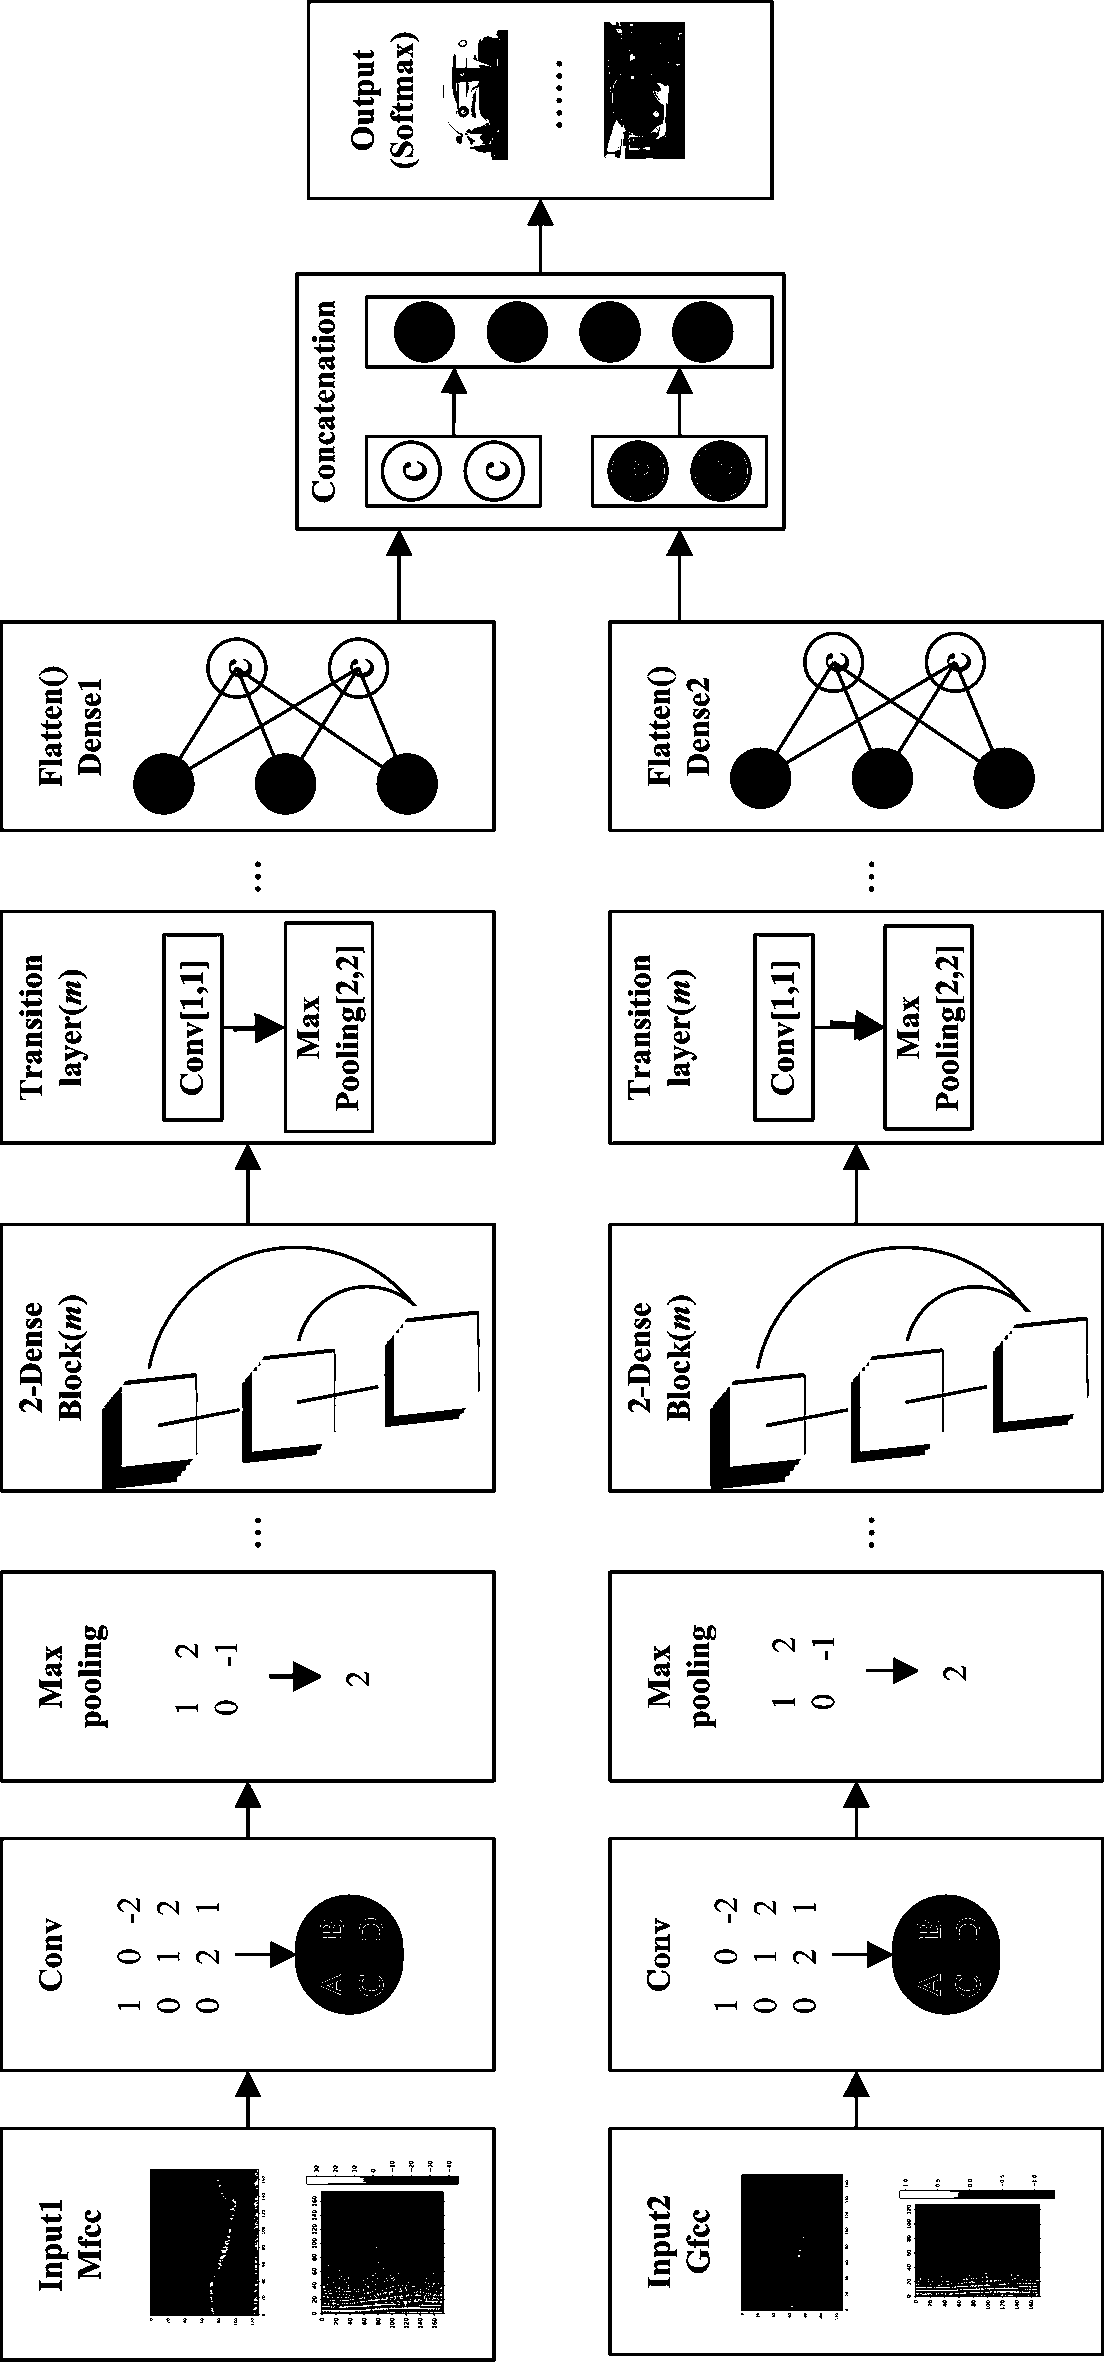 Urban sound event classification method based on dual-feature 2-DenseNet in parallel